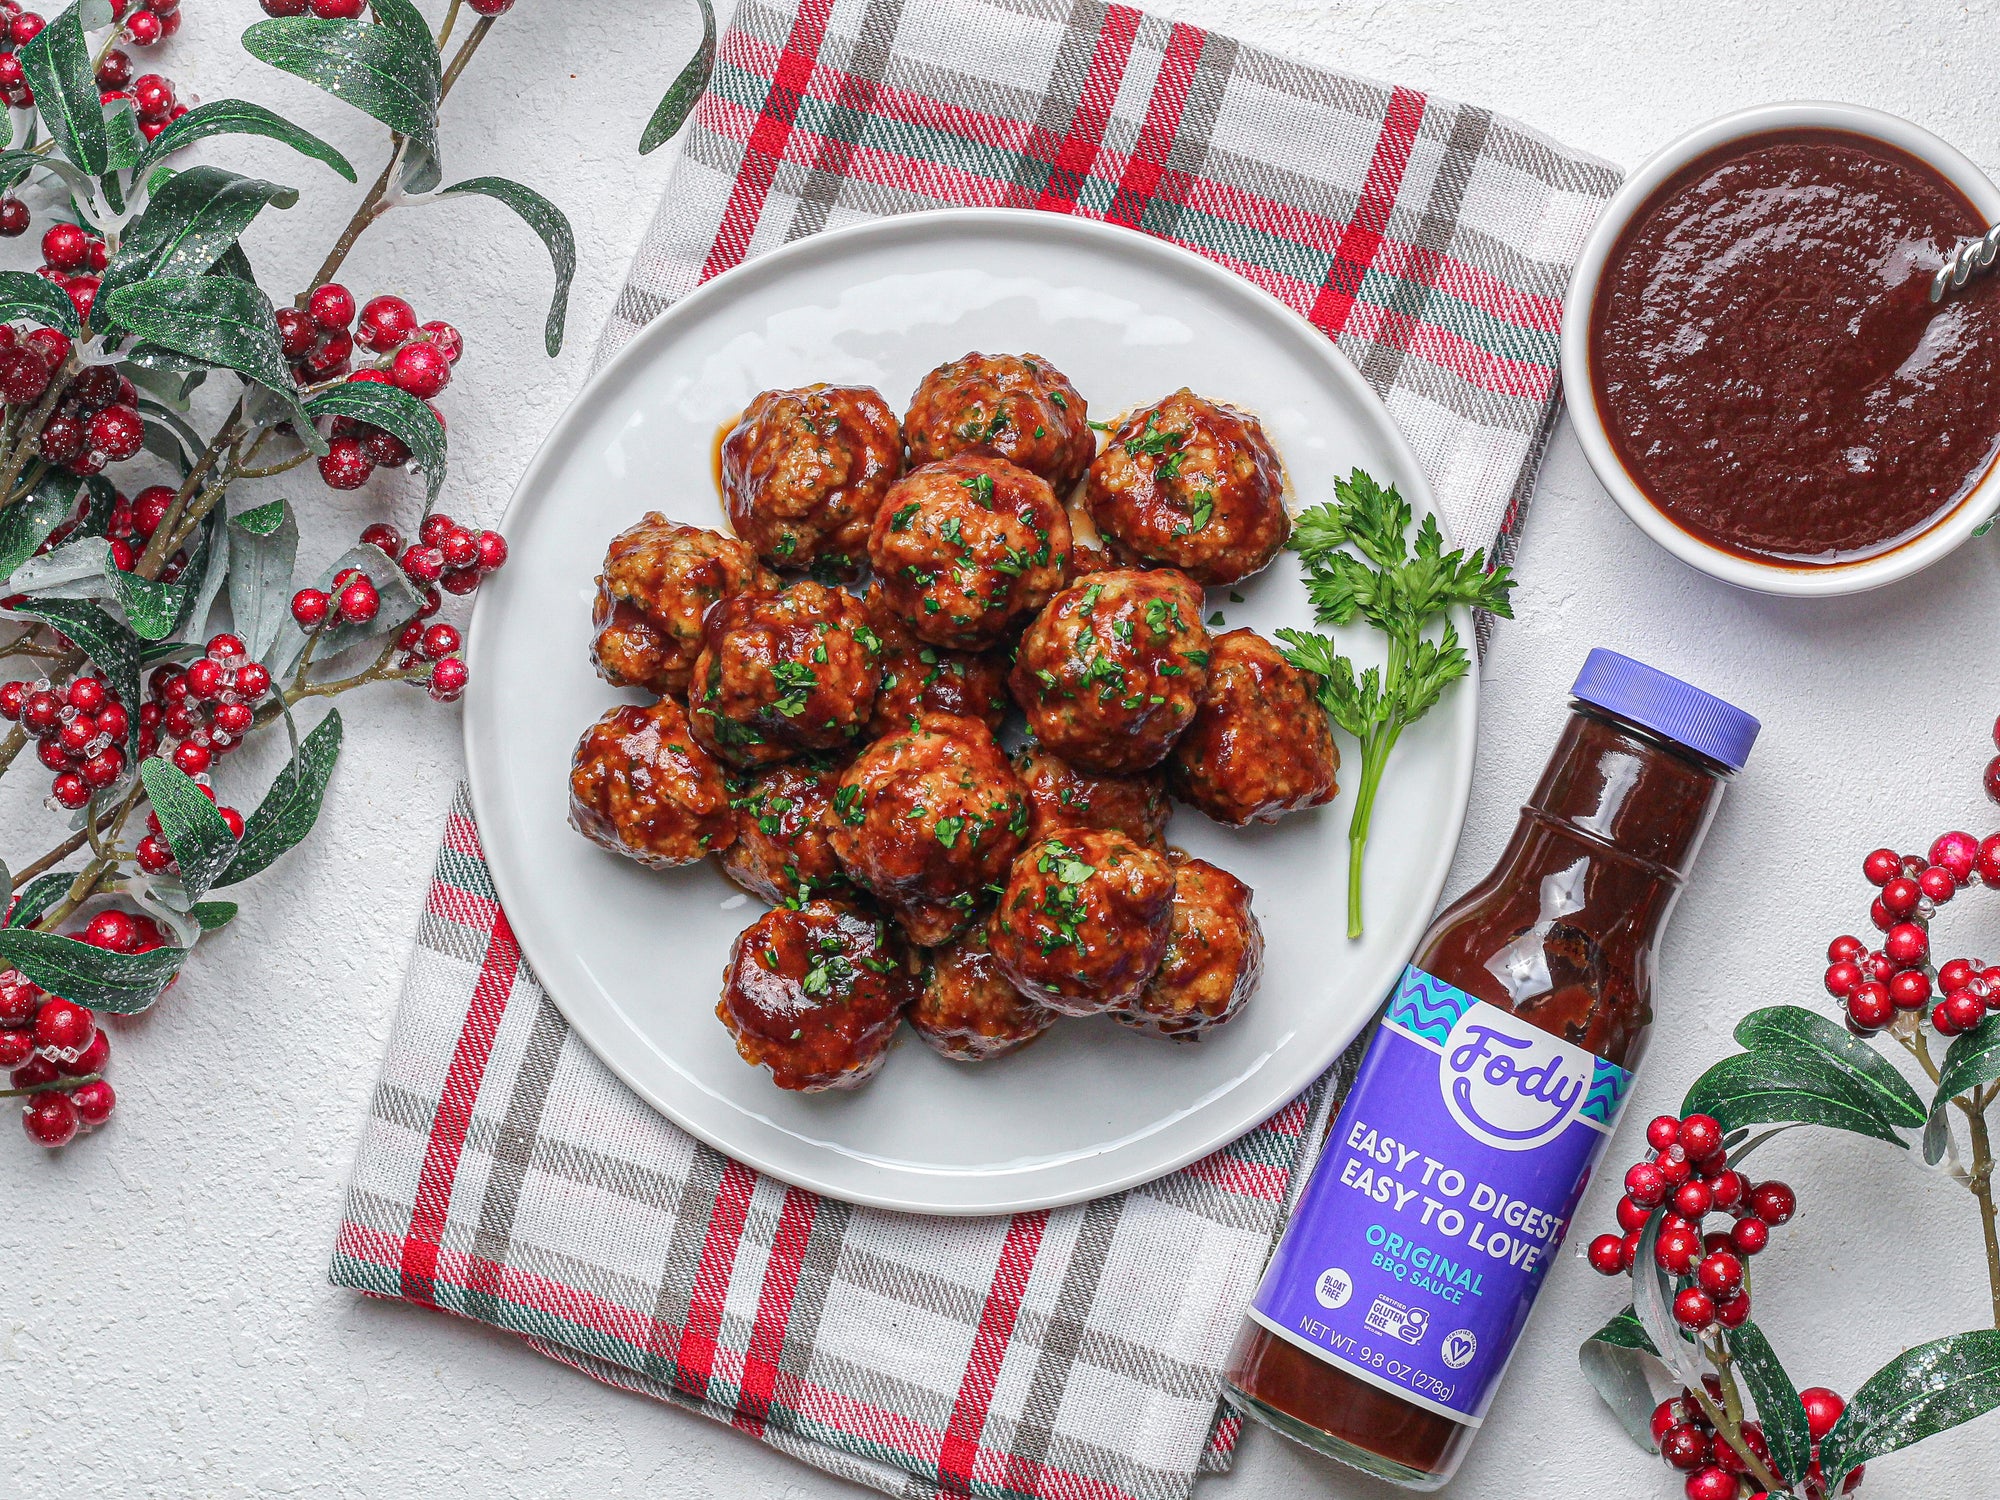 Fody’s Turkey Meatballs with BBQ Cranberry Sauce